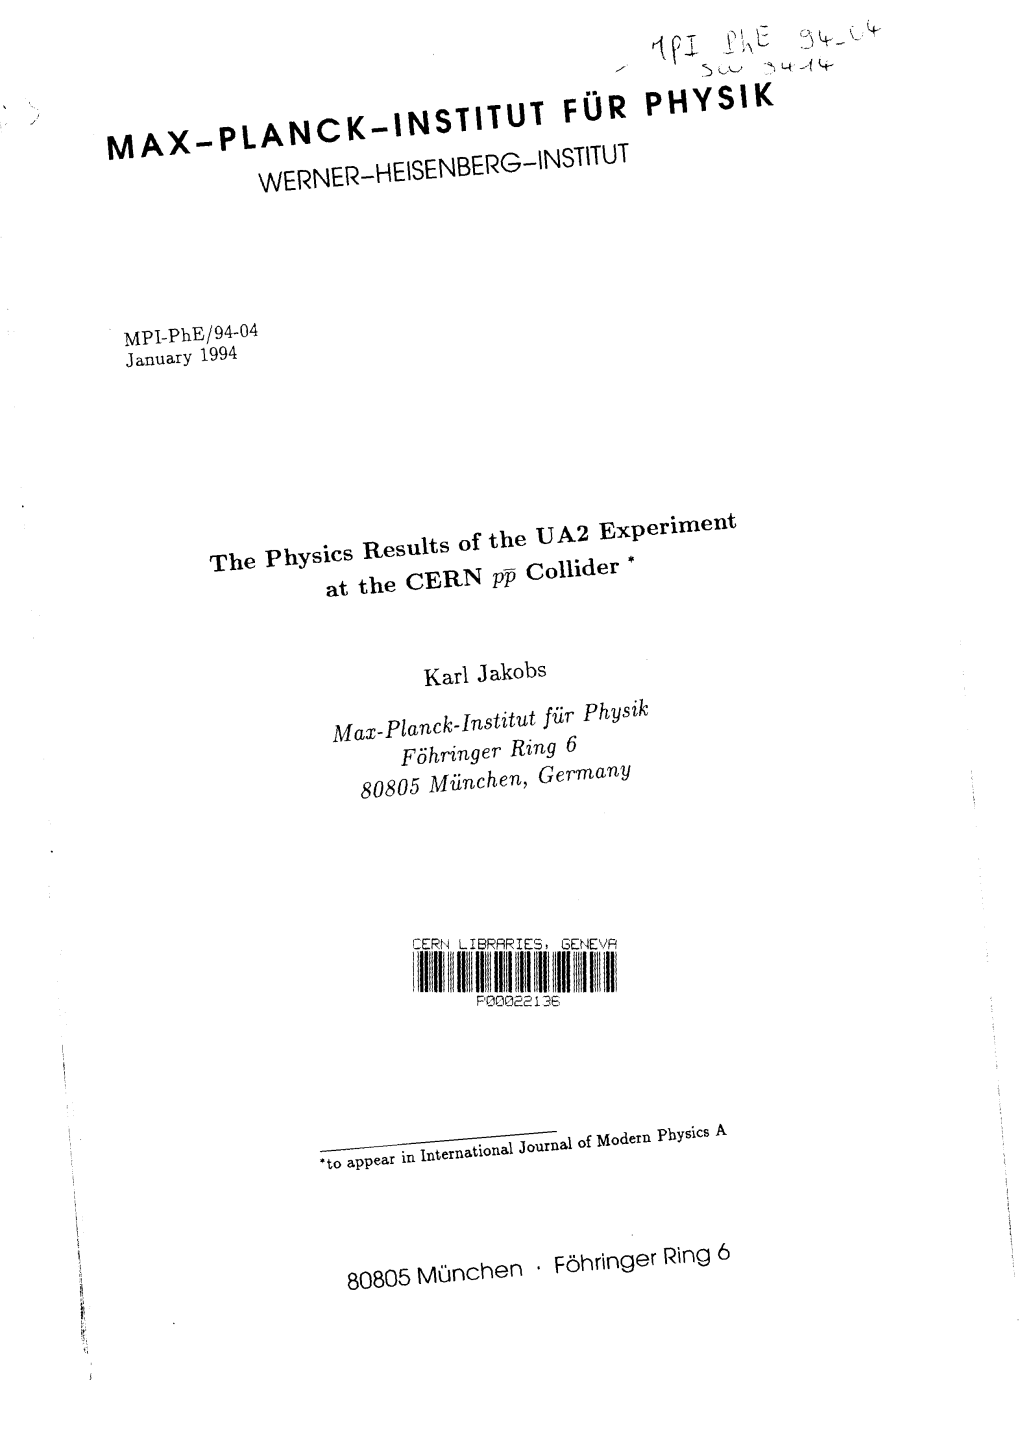 The Physics Results of the UA2 Experiment at the CERN $P